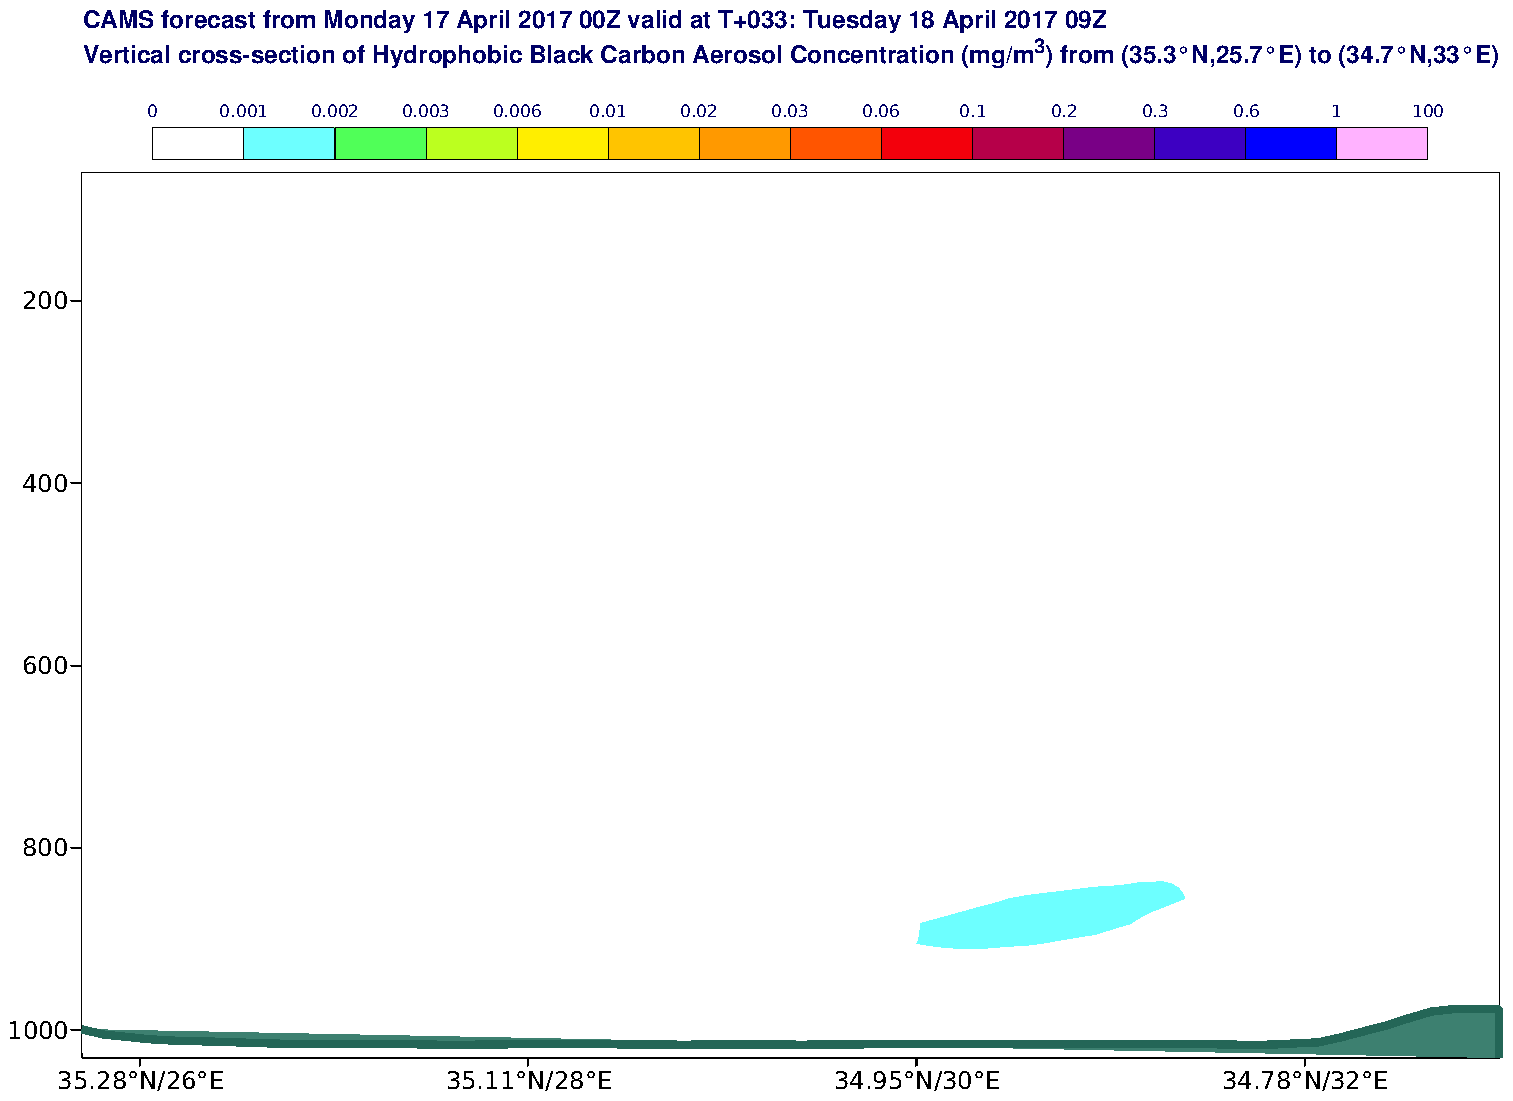 Vertical cross-section of Hydrophobic Black Carbon Aerosol Concentration (mg/m3) valid at T33 - 2017-04-18 09:00